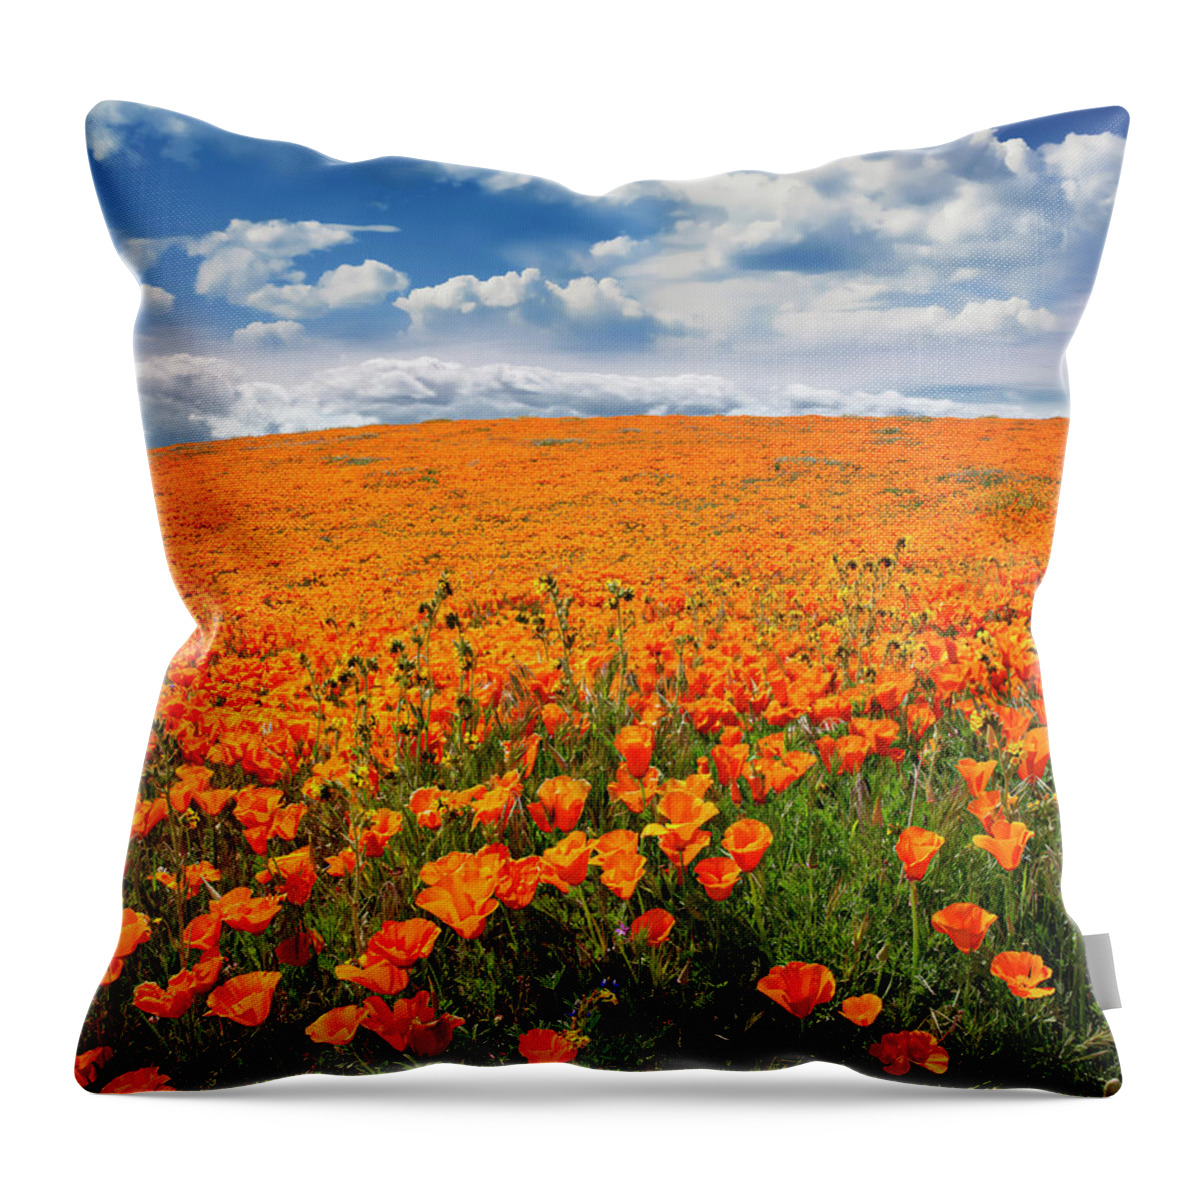 Antelope Valley Poppy Reserve Throw Pillow featuring the photograph The Poppy Field by Endre Balogh